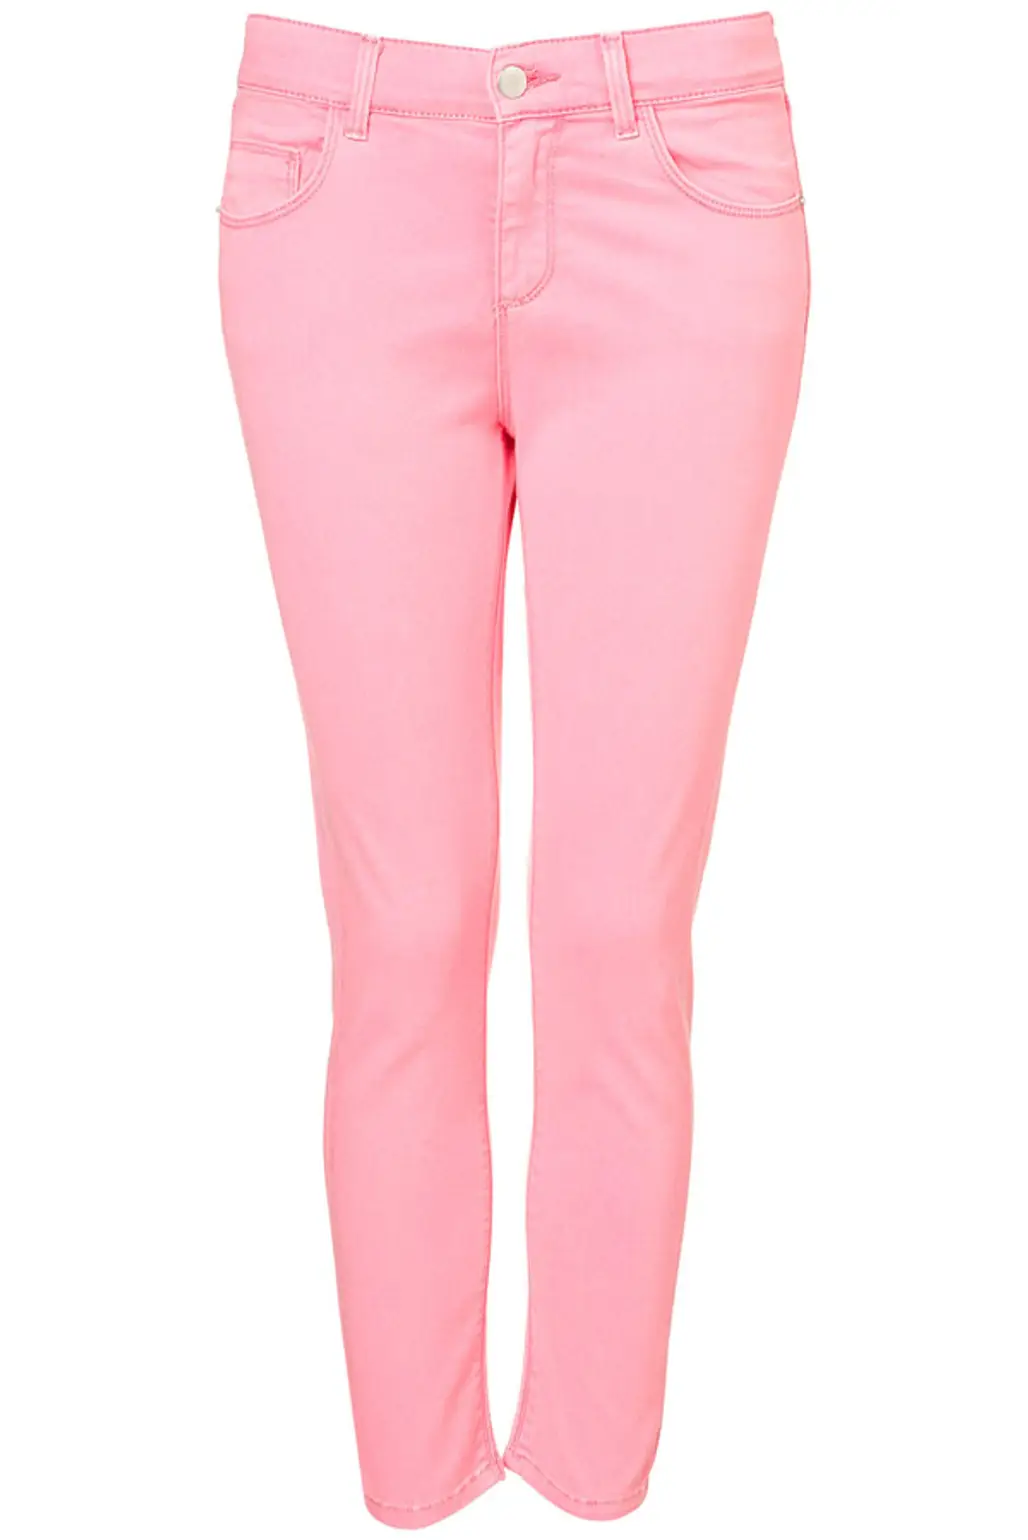 Moto Neon Pink 7/8ths Jeans